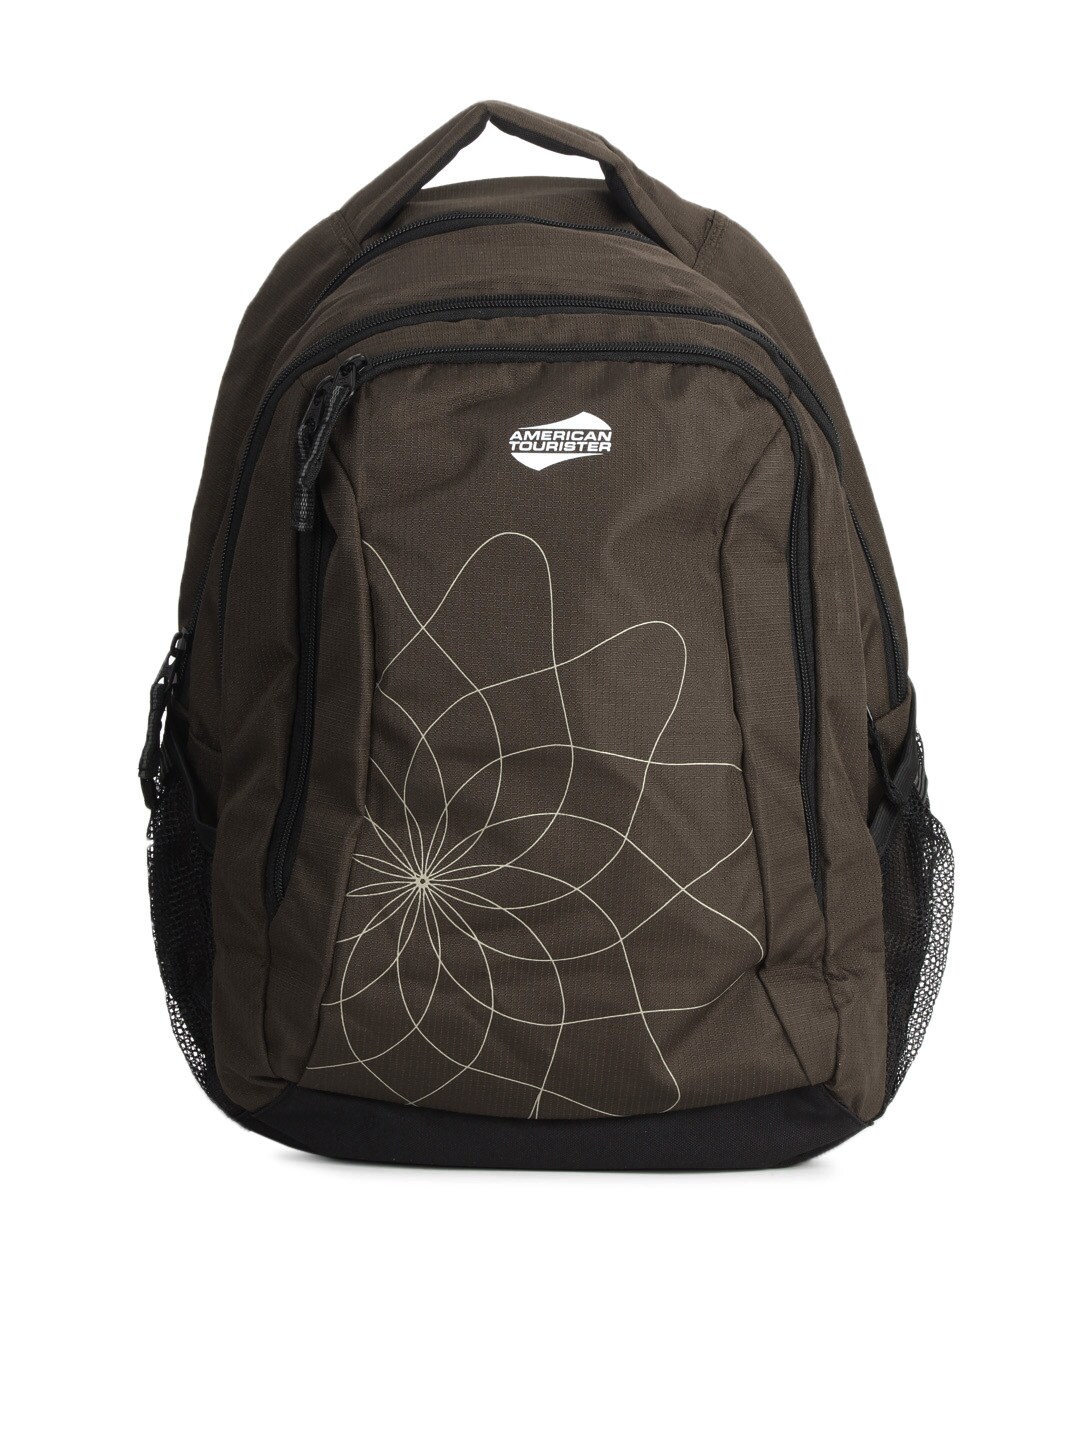 American Tourister Unisex Brown Backpack